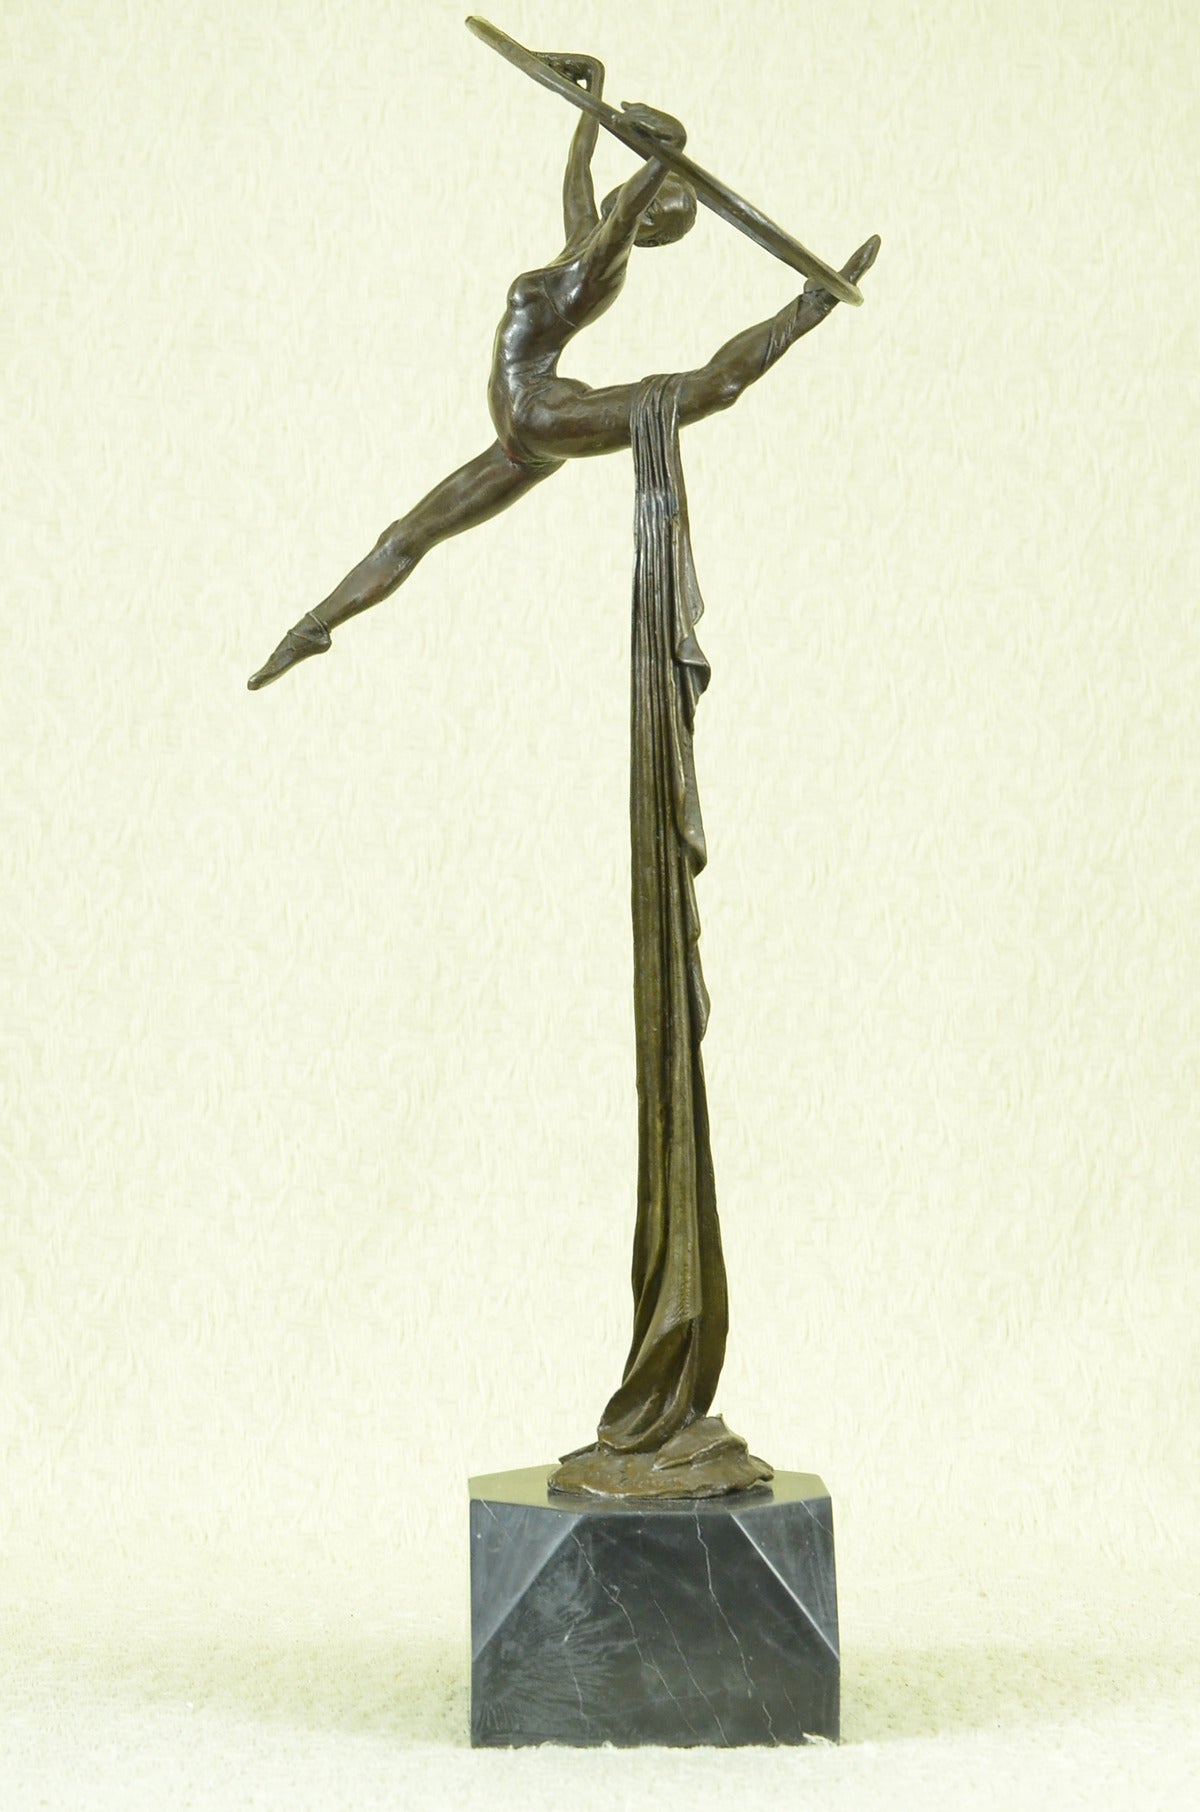 Handcrafted bronze sculpture SALE Contemporary , Pure Gymnast, Female  Abstract